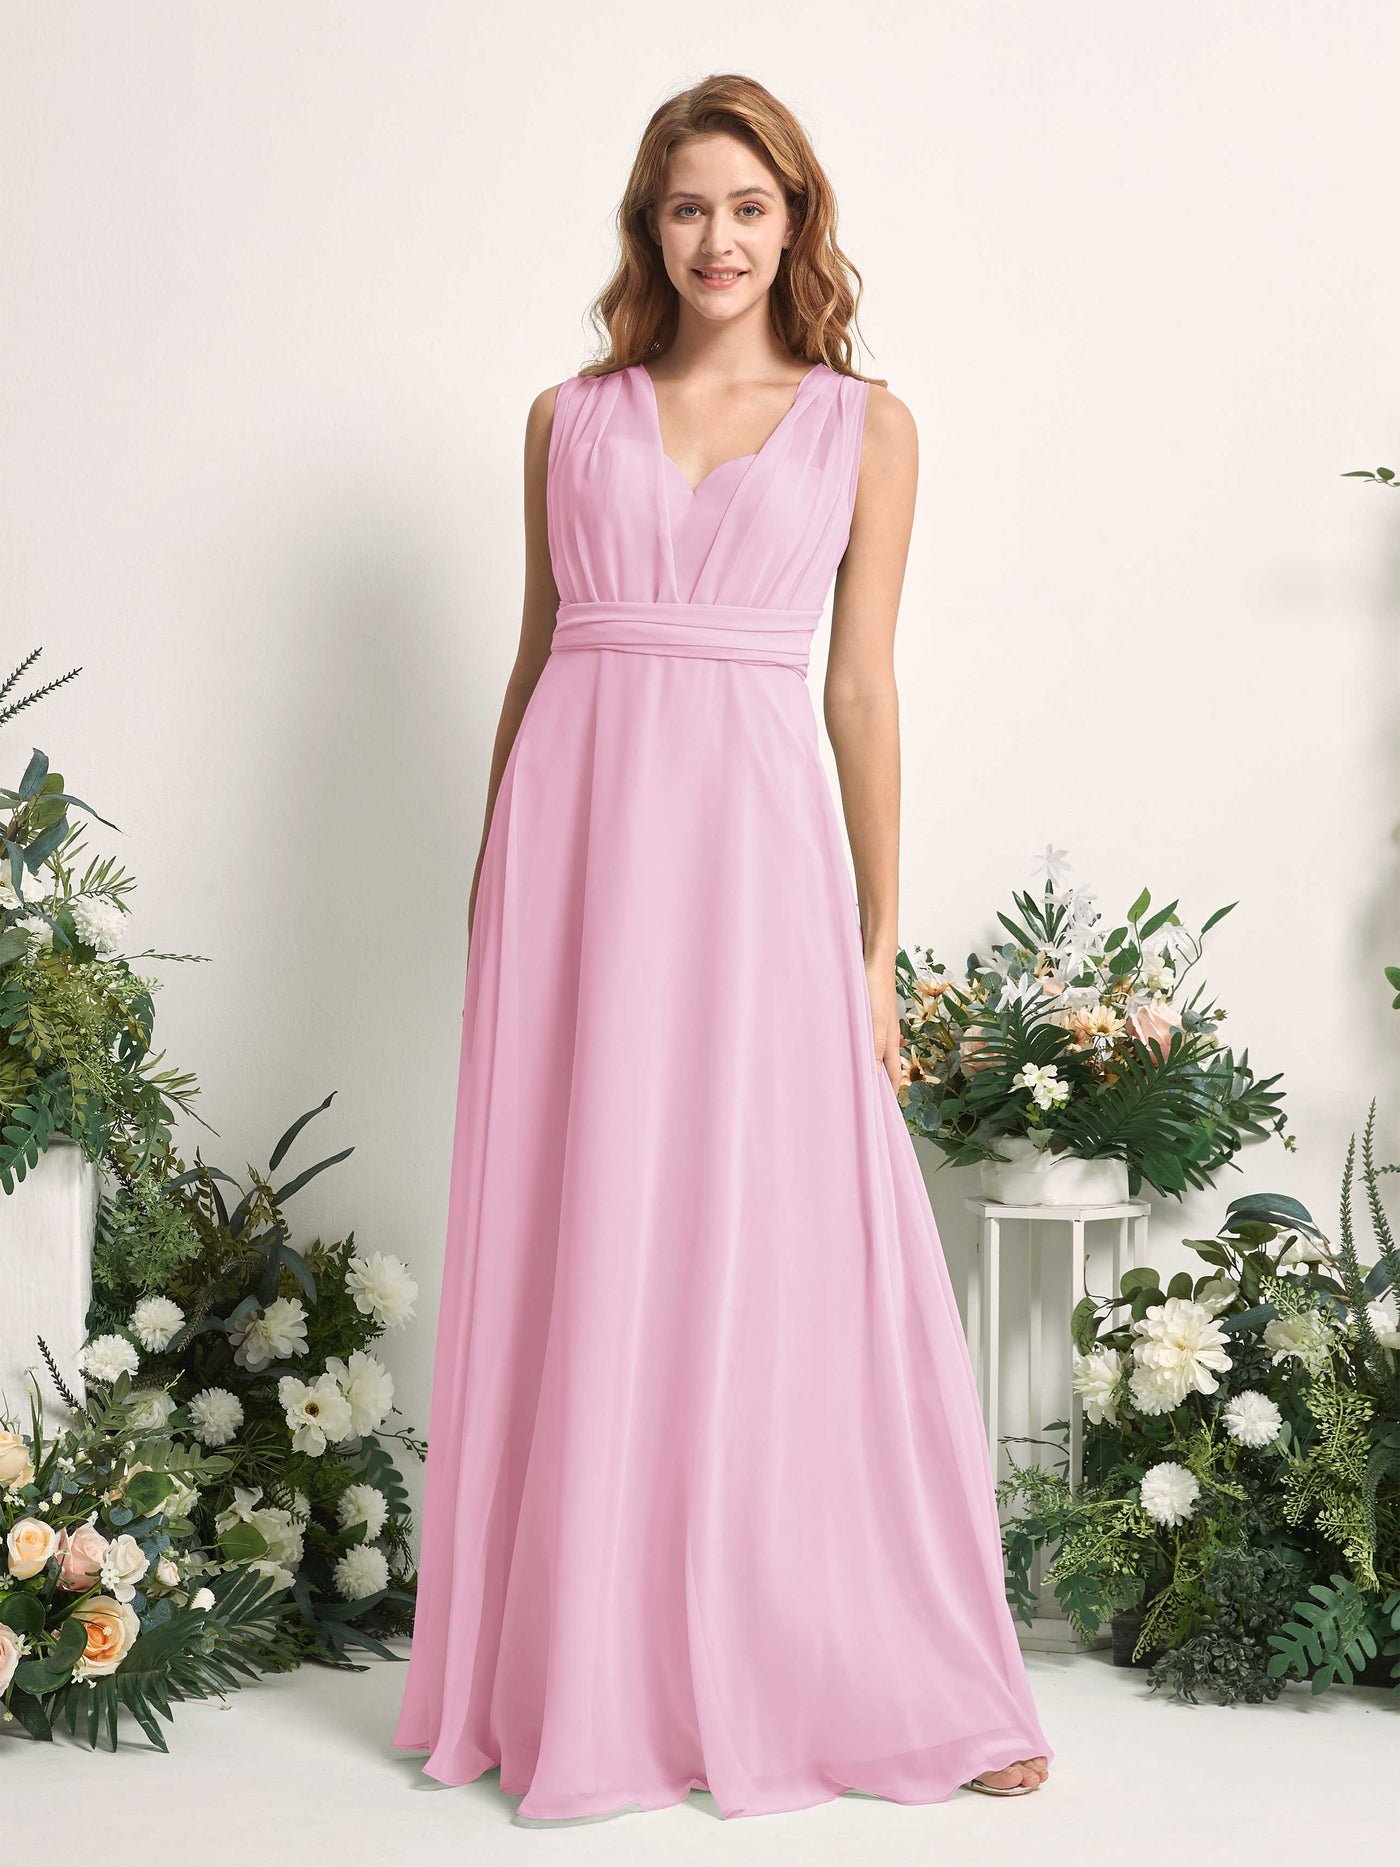 Candy Pink Bridesmaid Dresses Bridesmaid Dress A-line Chiffon Halter Full Length Short Sleeves Wedding Party Dress (81226339)#color_candy-pink